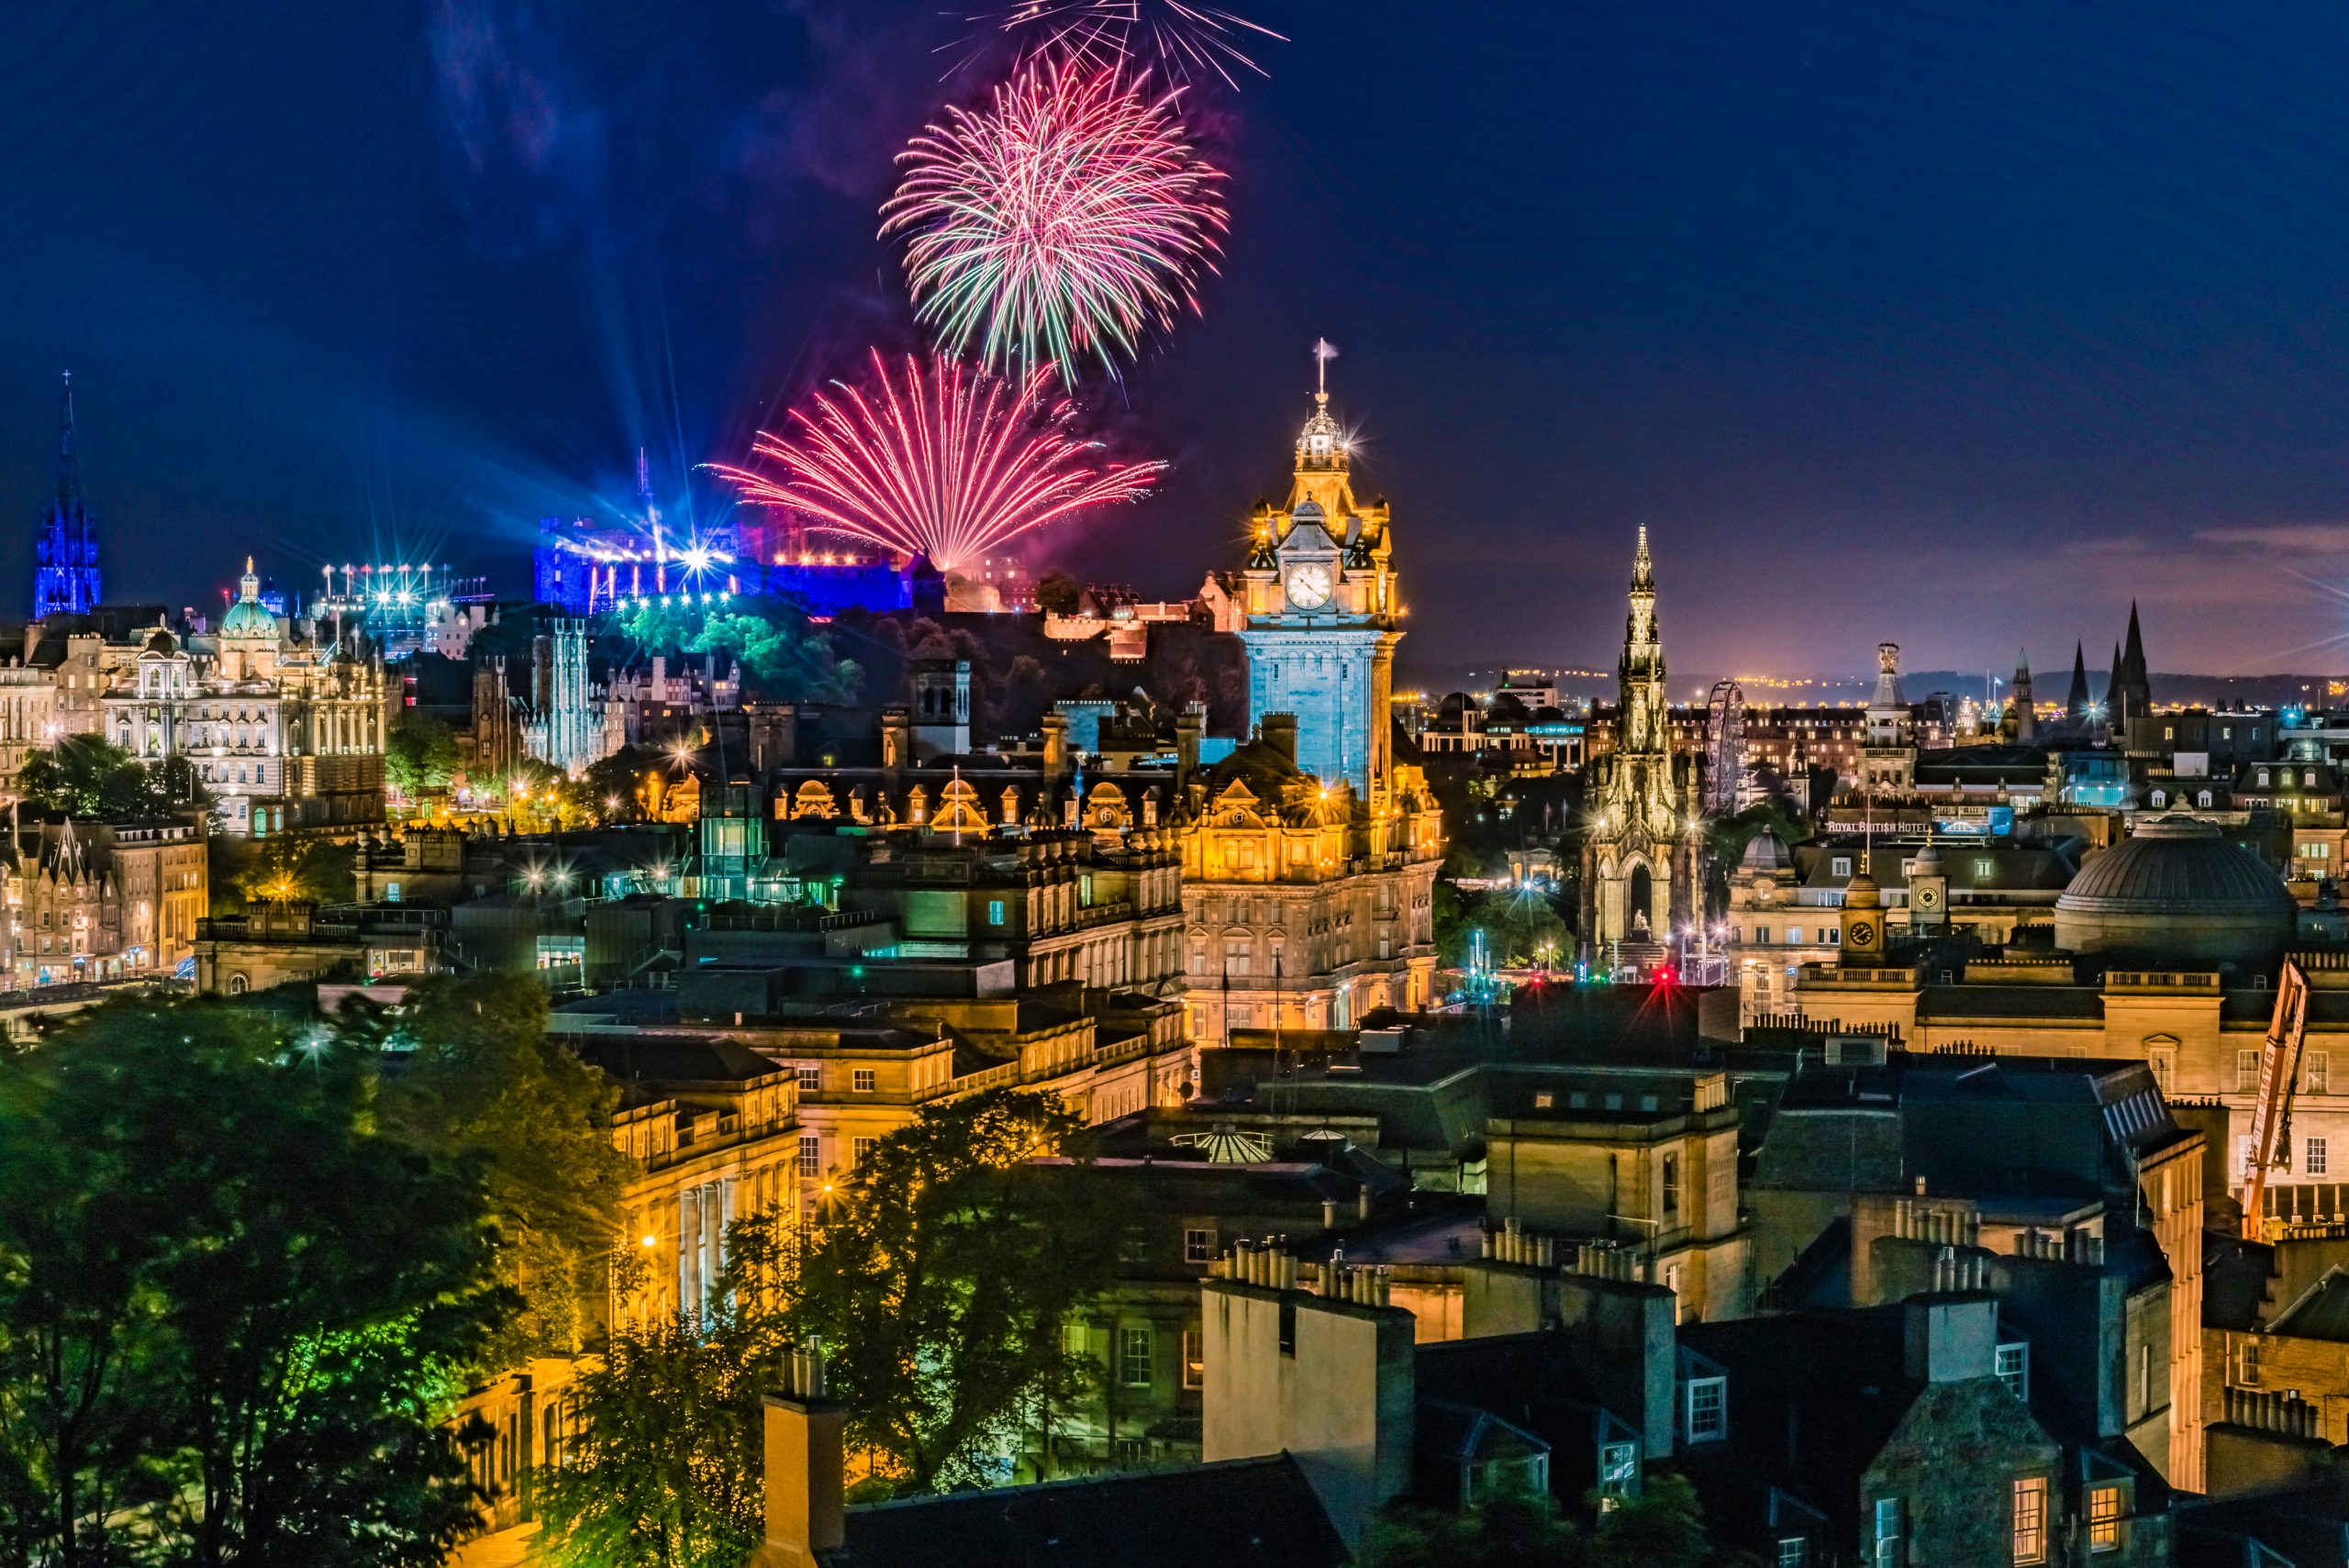 Fireworks,On,The,City,Of,Edinburgh,In,Scotland,England,During